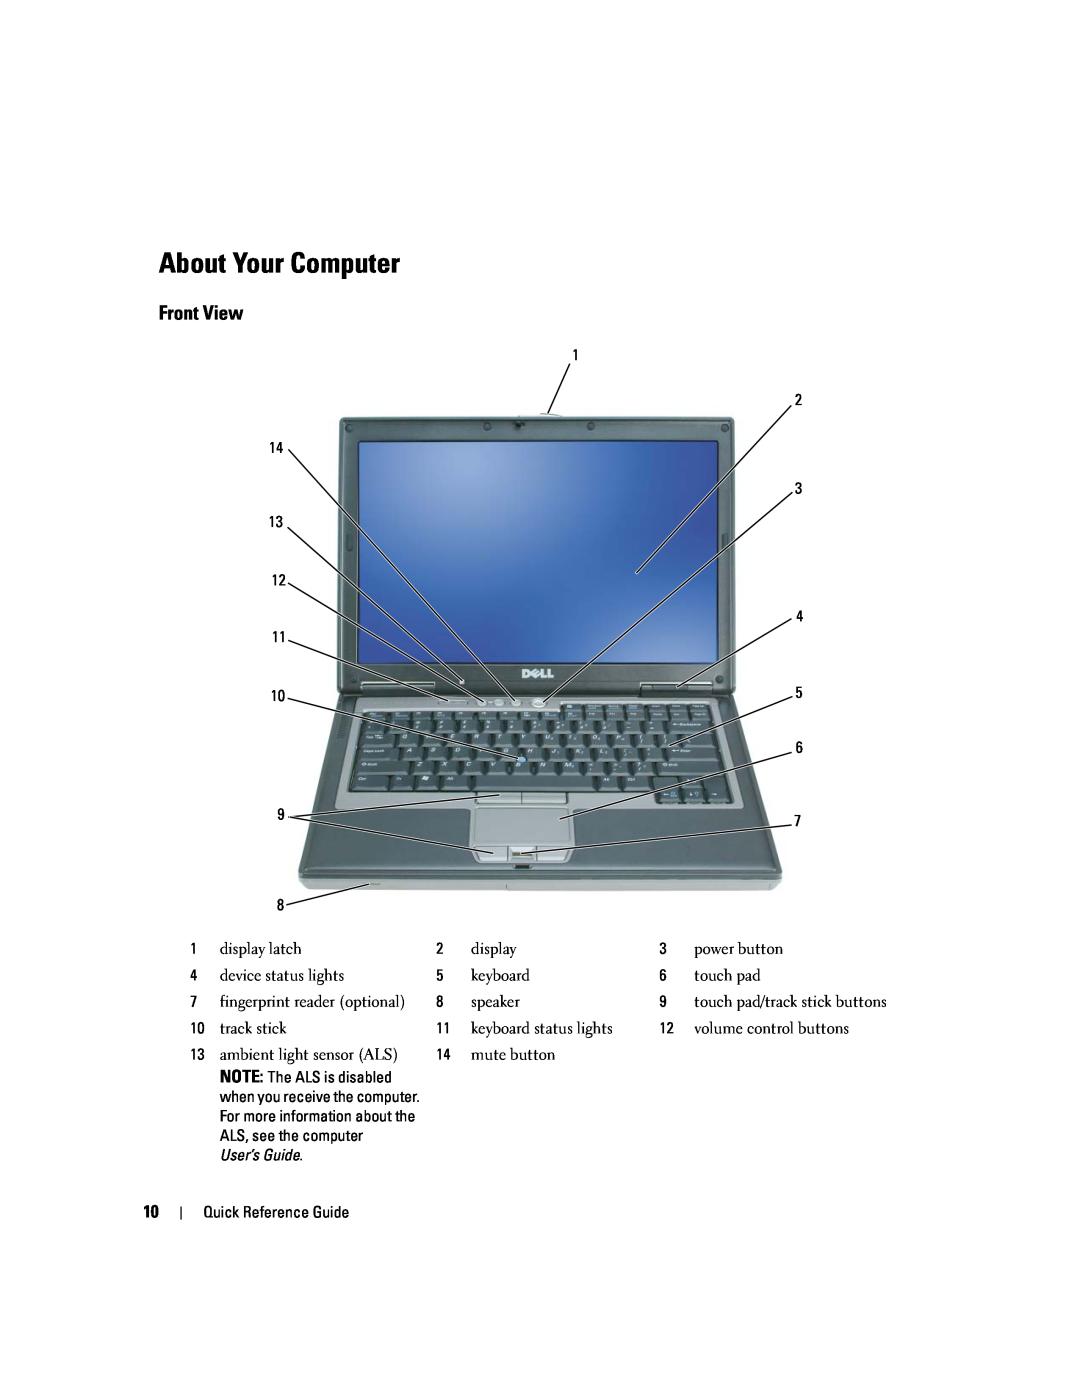 Dell D620 manual About Your Computer, Front View 